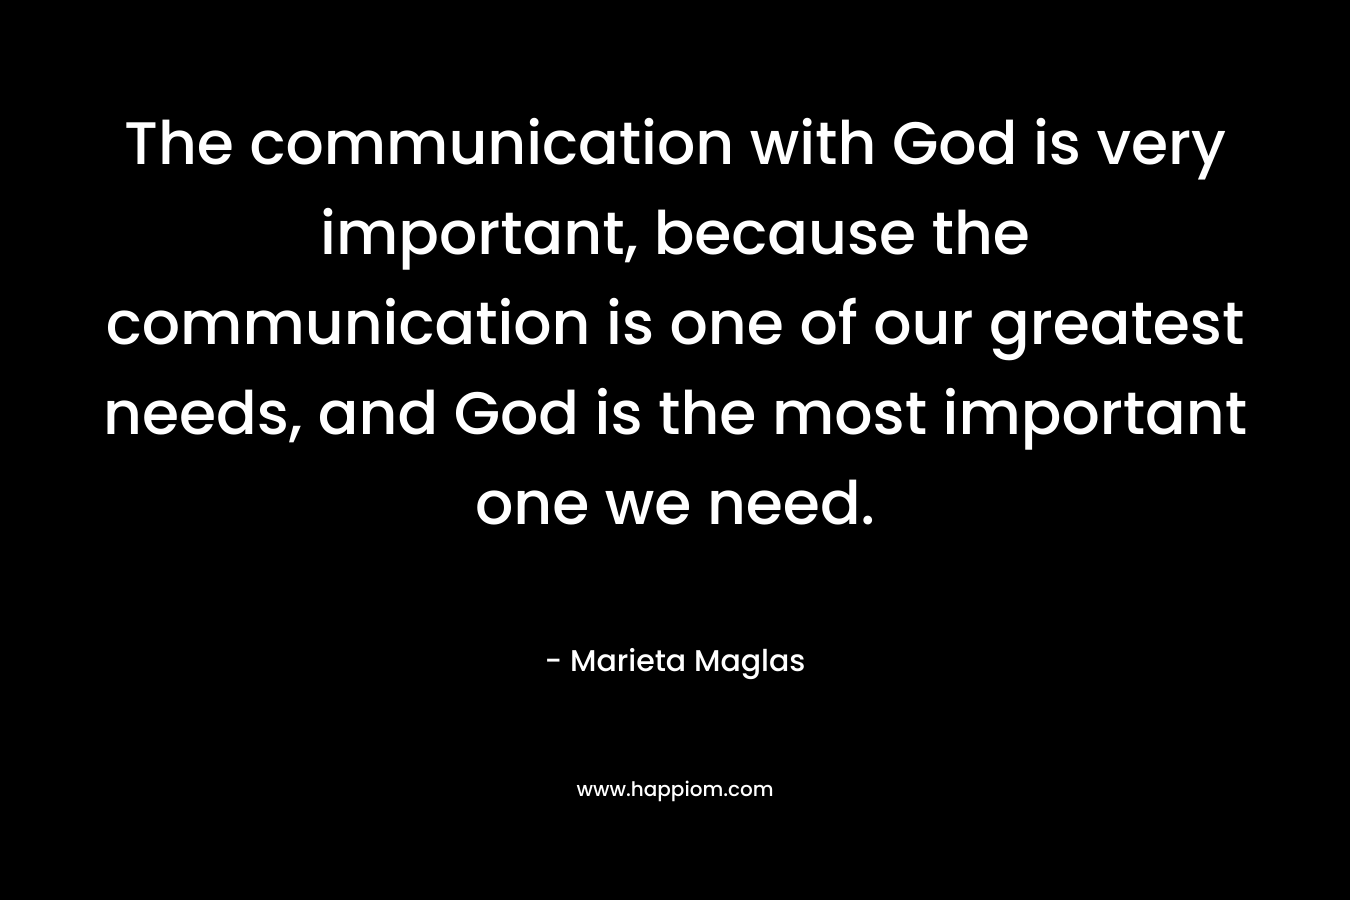 The communication with God is very important, because the communication is one of our greatest needs, and God is the most important one we need. – Marieta Maglas